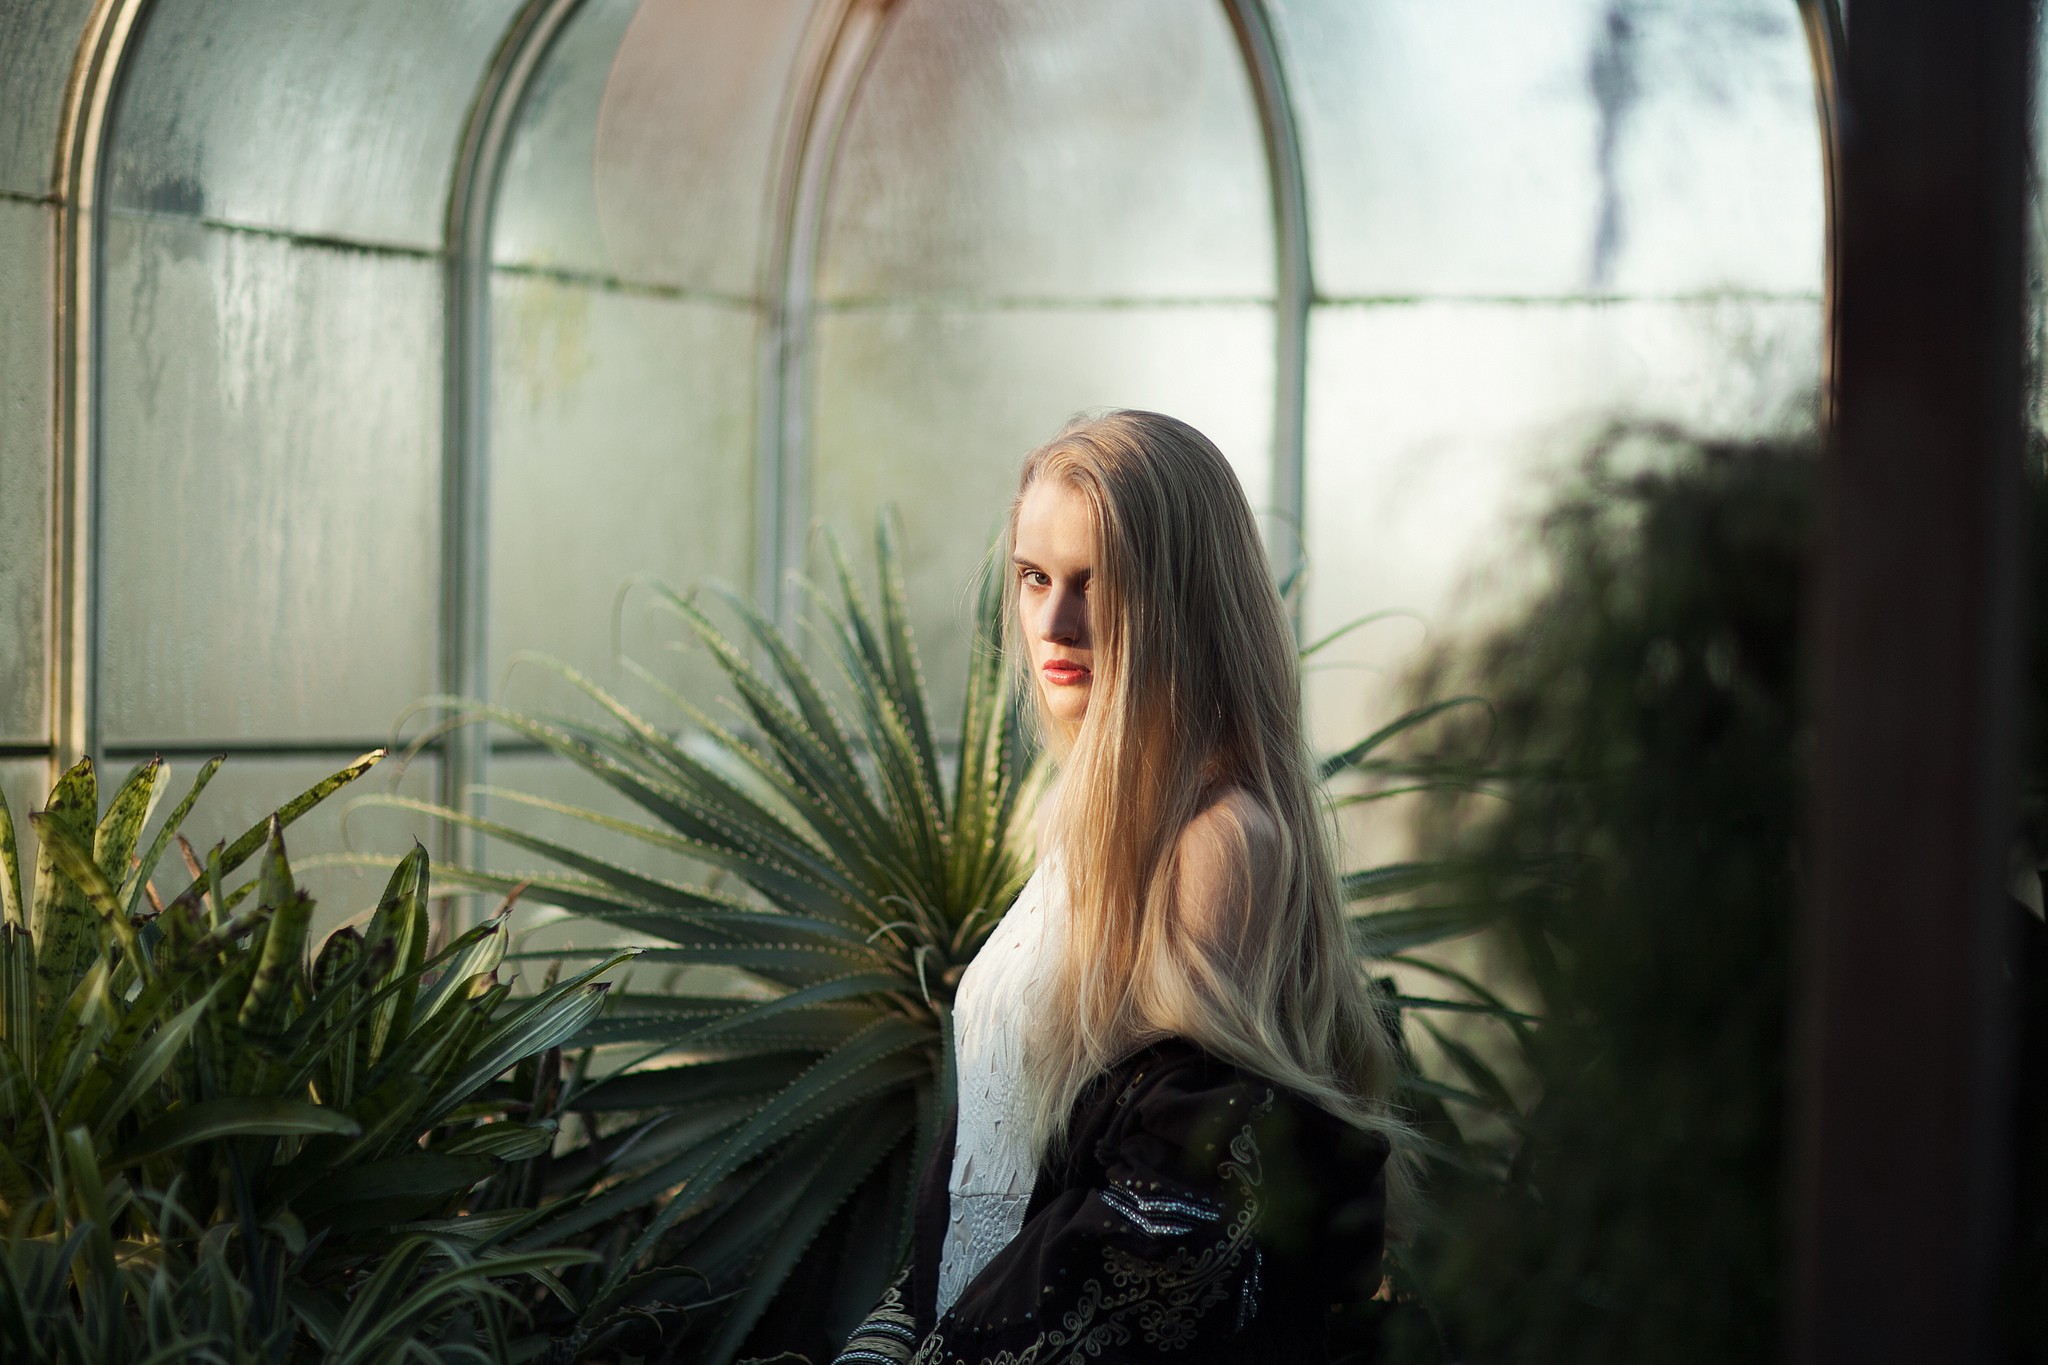 People 2048x1365 women Ruby James blonde looking at viewer greenhouse plants